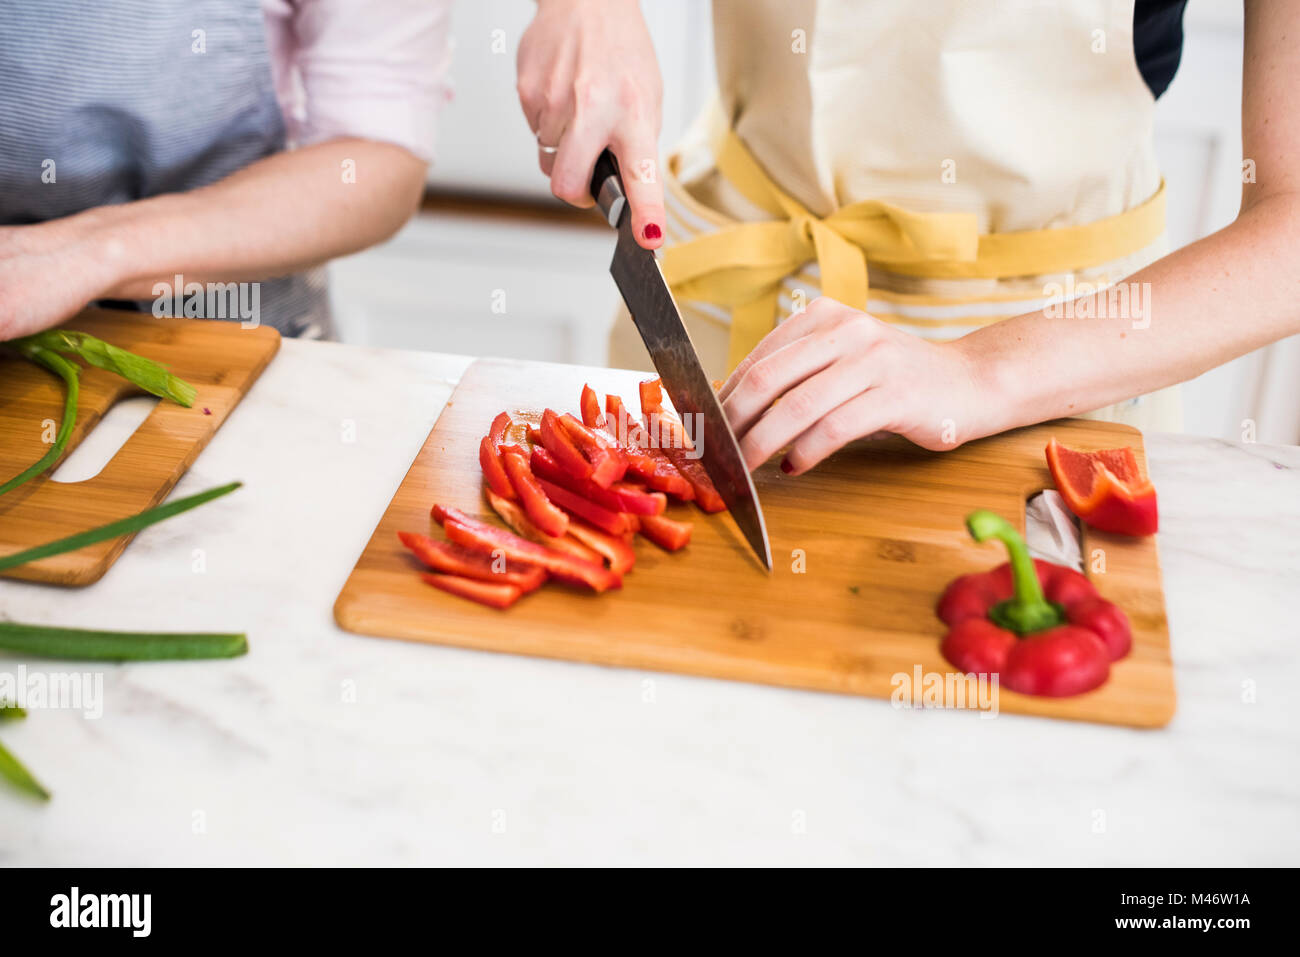 Chopping skills in the kitchen. Stock Photo